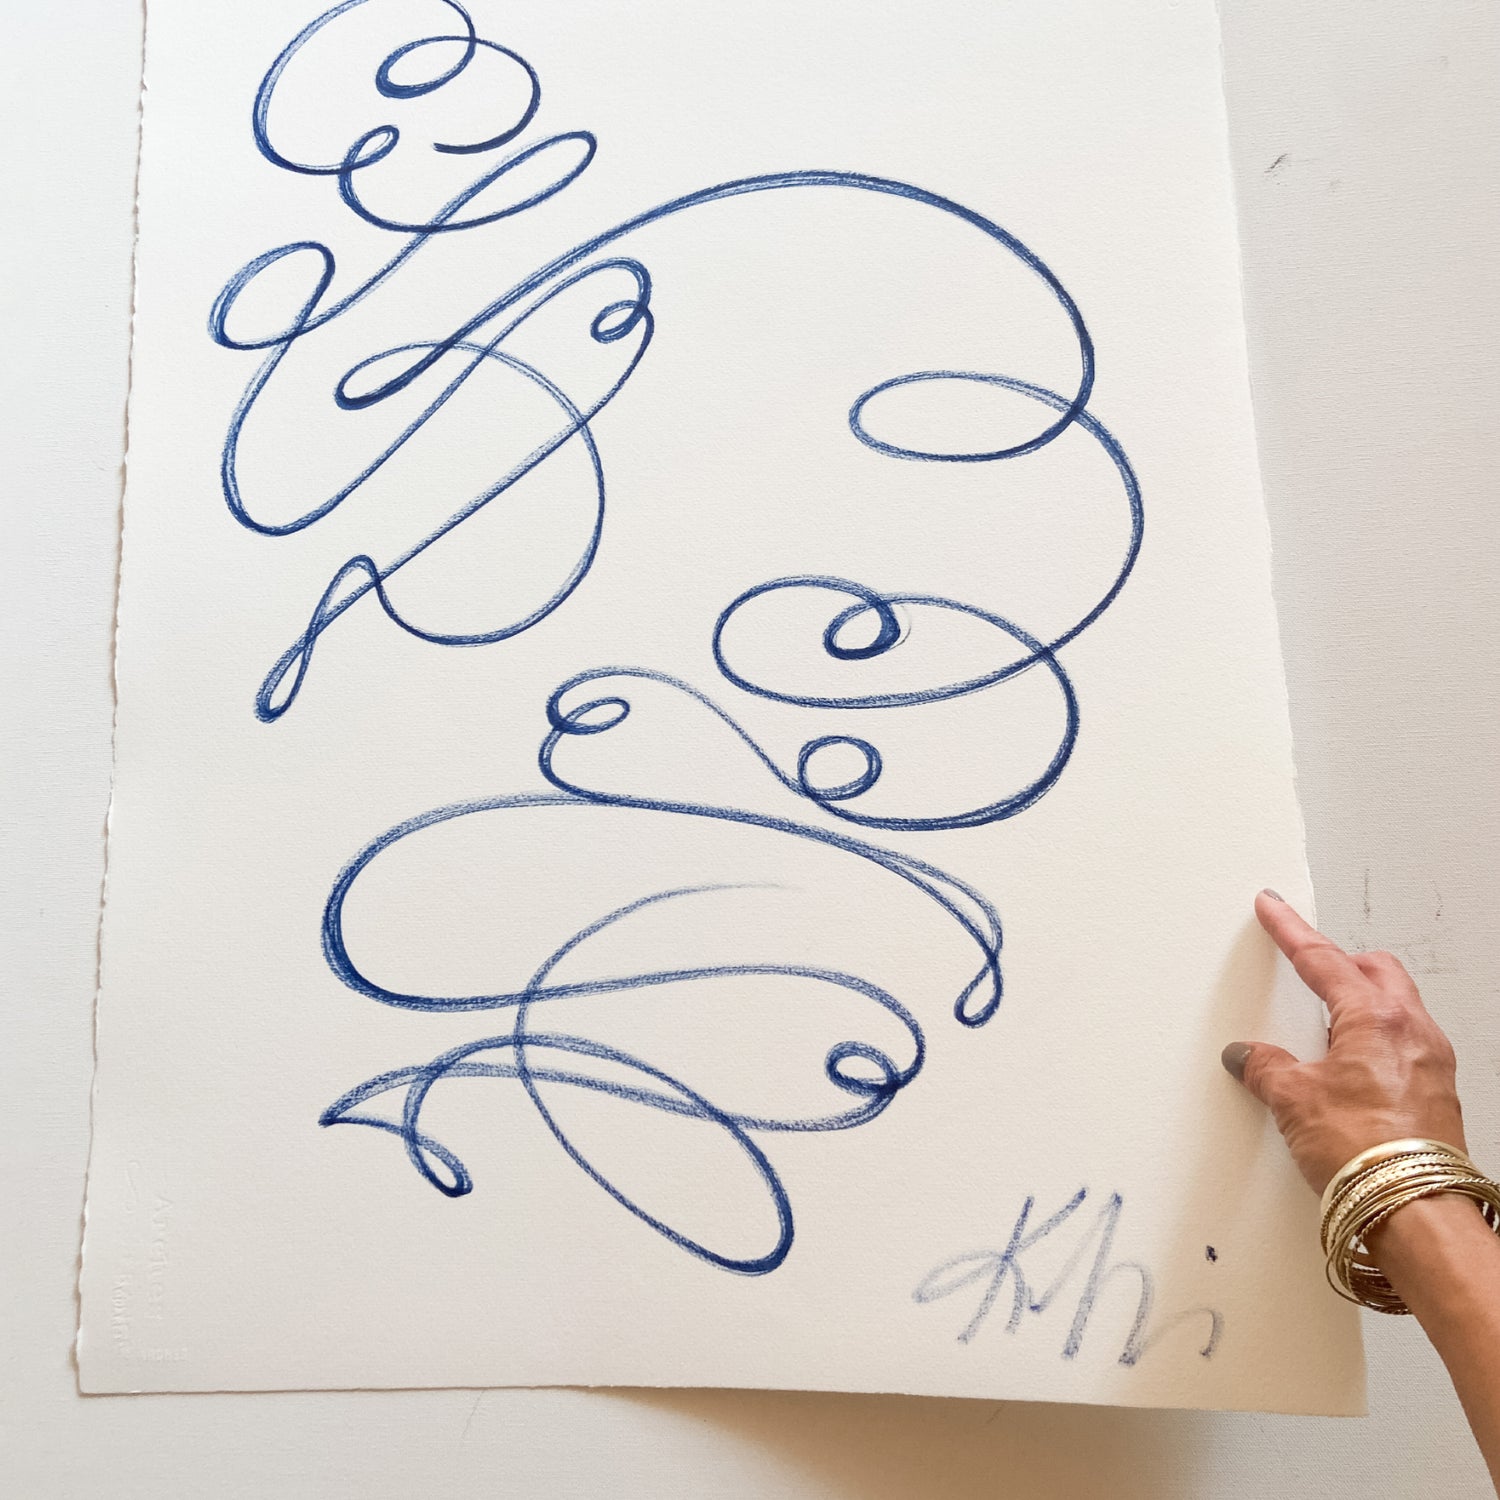 Powder Blue Abstract Design on Paper being held with one hand with gold bracelets